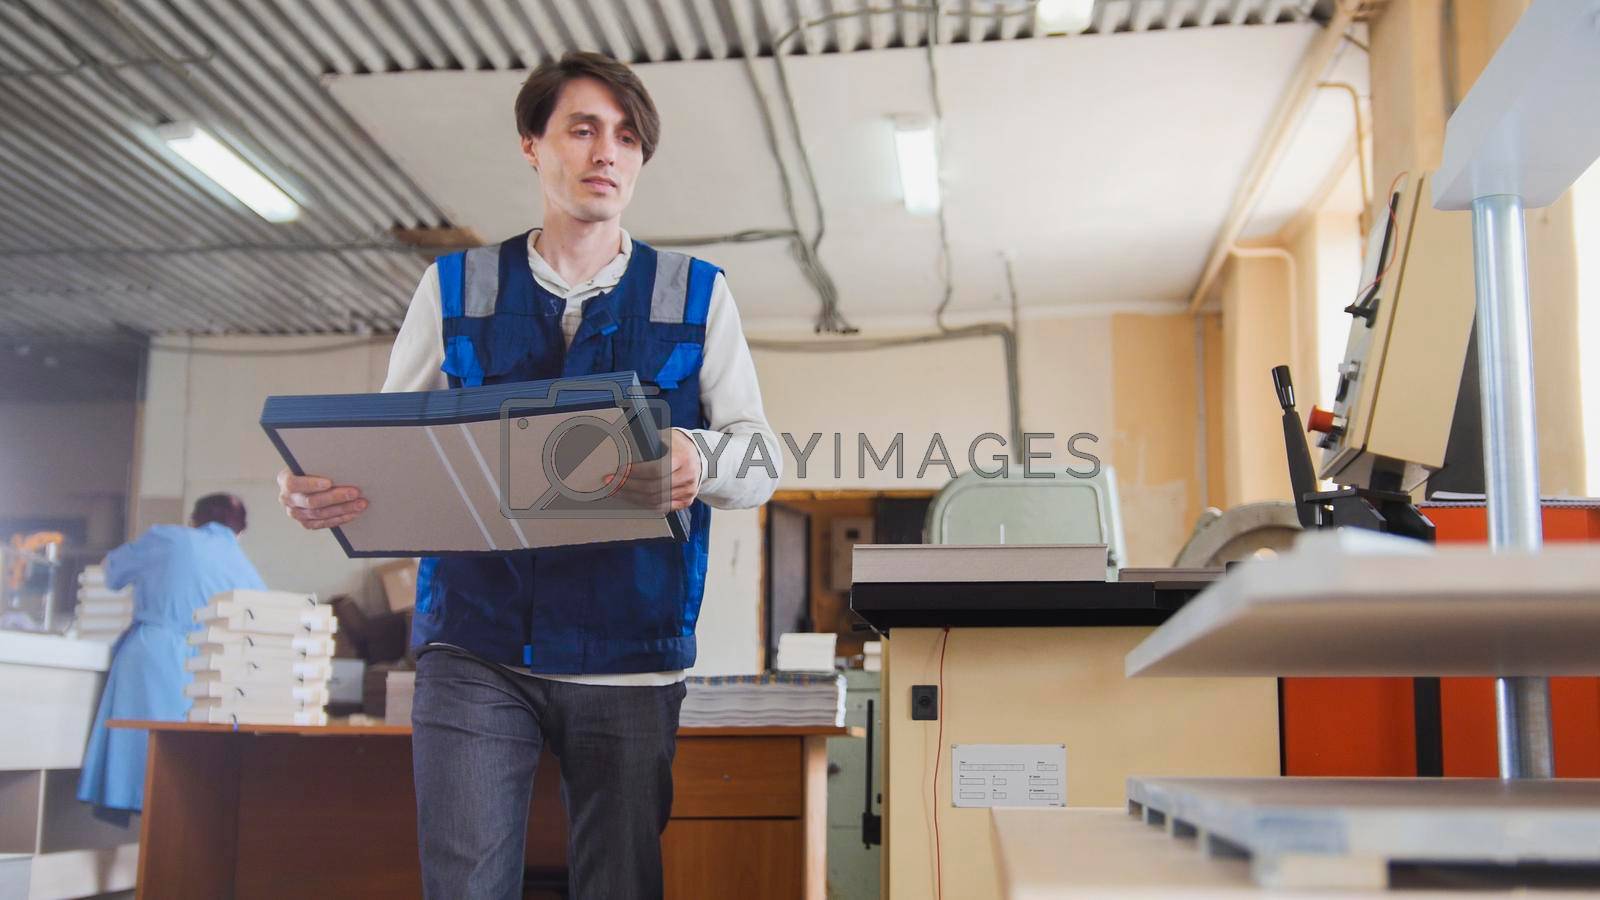 Royalty free image of Printing process - worker inserts paper sheets by Studia72